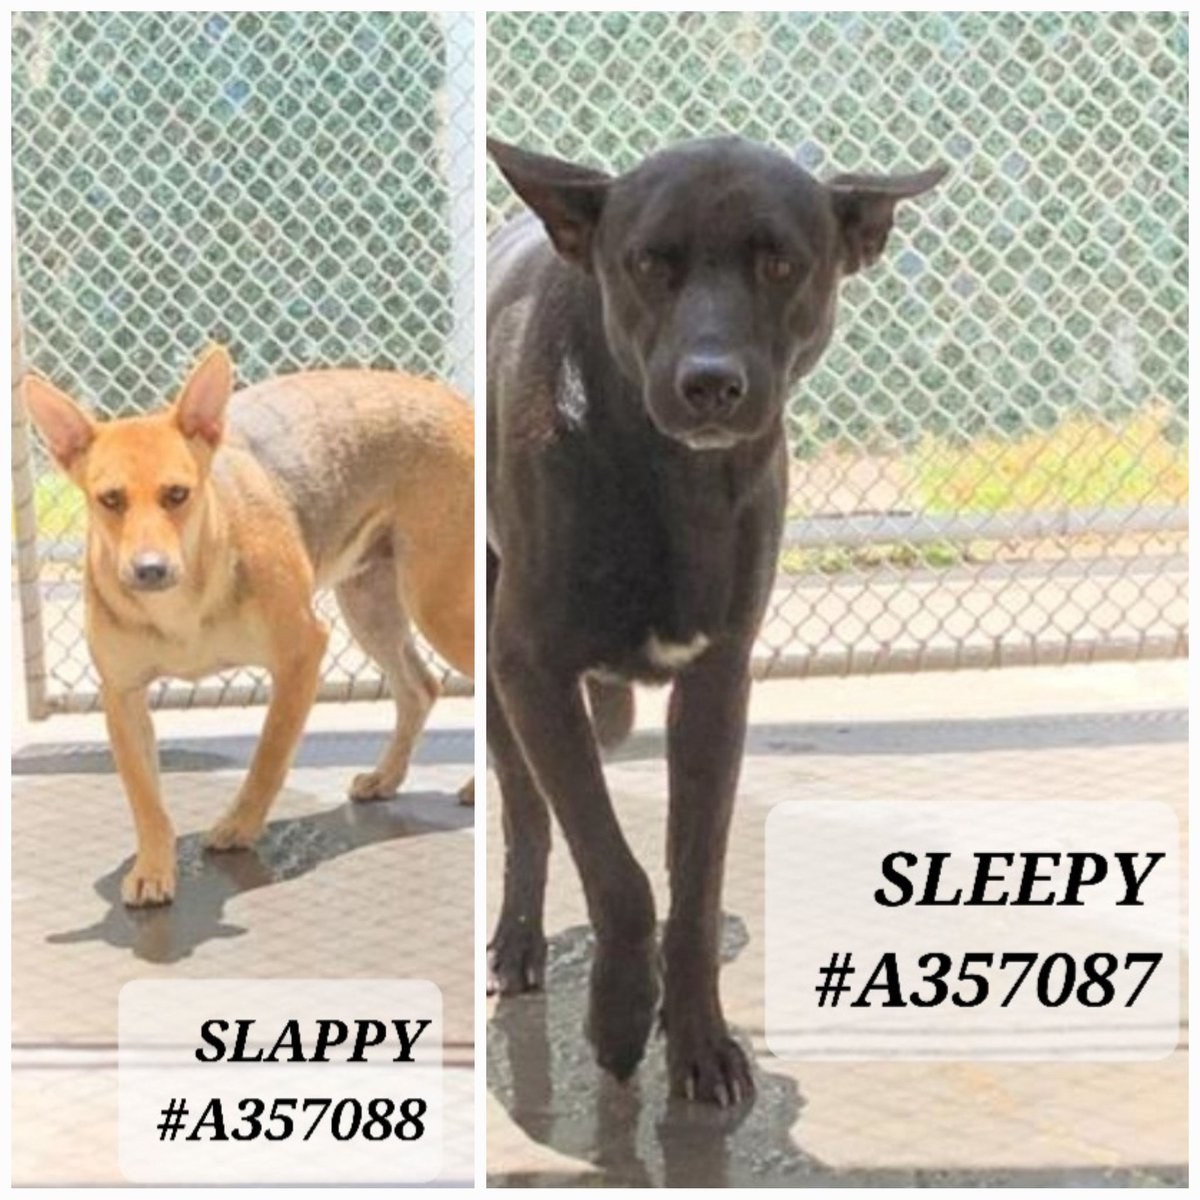 Dogs #Lost #Found #Unclaimed, brought in 7/3
#LabMixes🆘️ #CorpusChristiTX 
SLAPPY #A357088 brown, black male
SLEEPY #A357087 black, white male
Were attacked, are fearful
Will be killed 7/20 noon #CorpusChristiTX 
☎️361-826-4630 if yours,  have ID and names